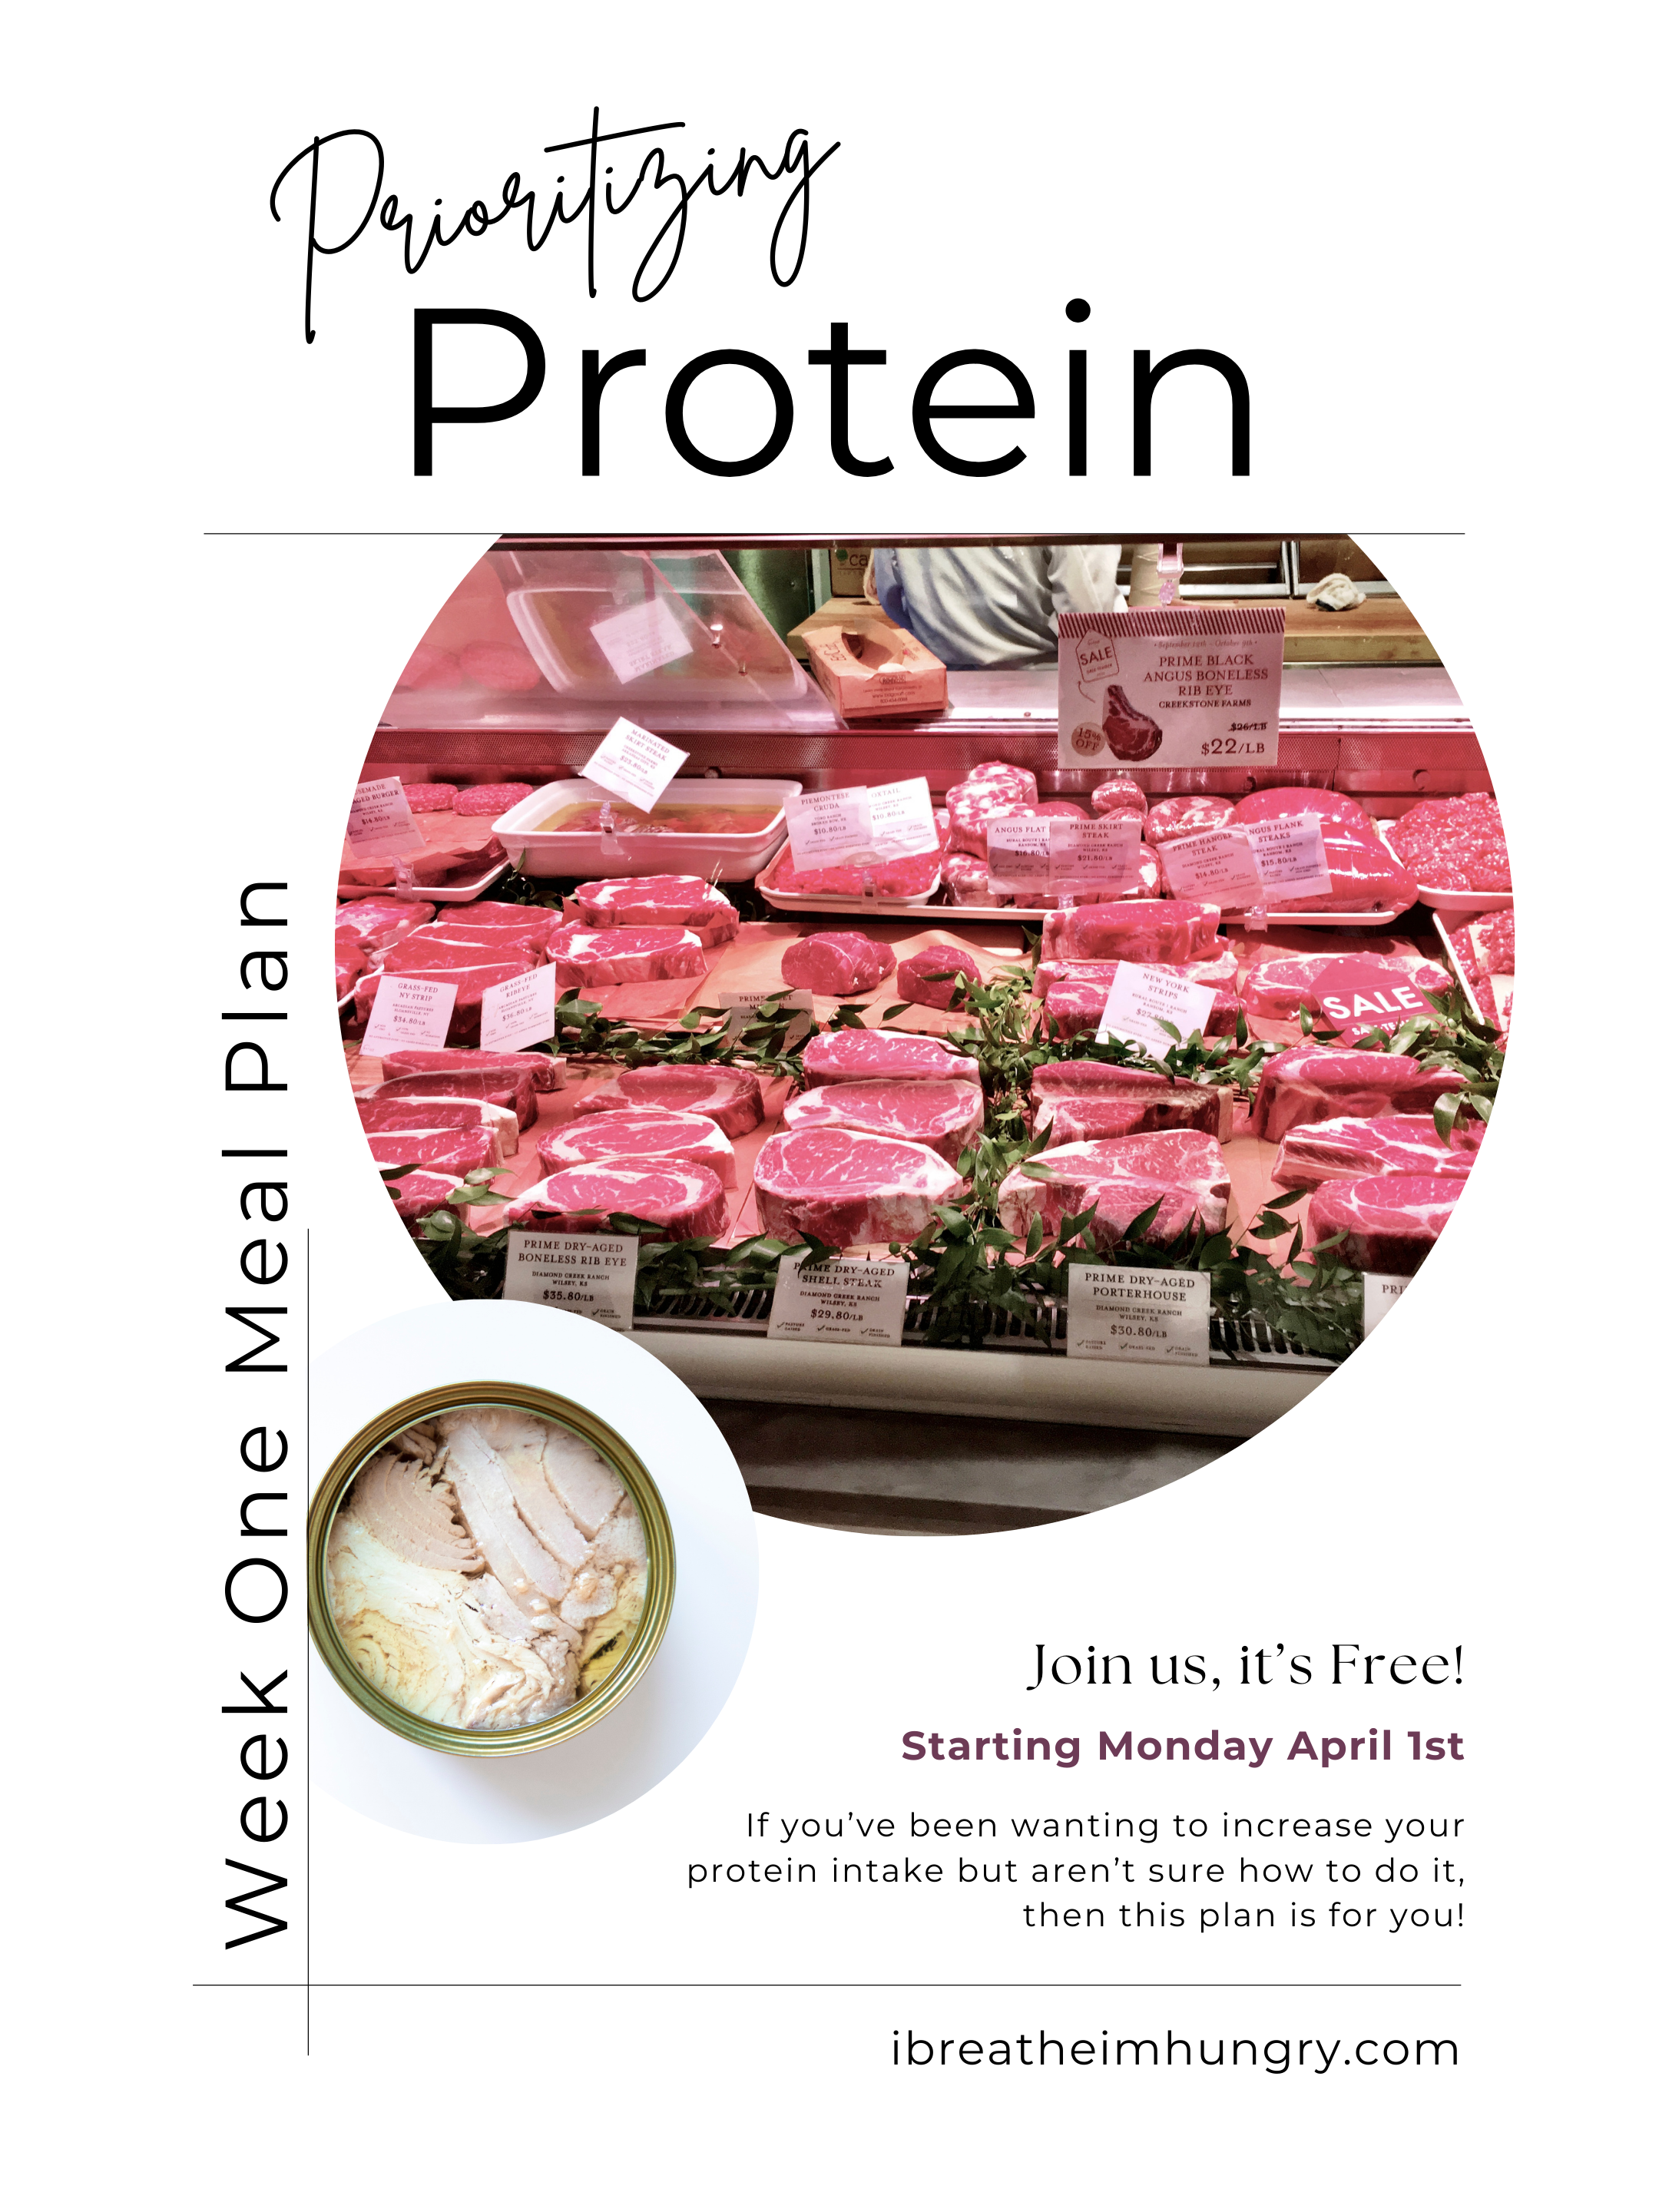 Poster advertising I Breathe I'm Hungry's new Prioritizing Protein Meal Plan starting April 1st. 